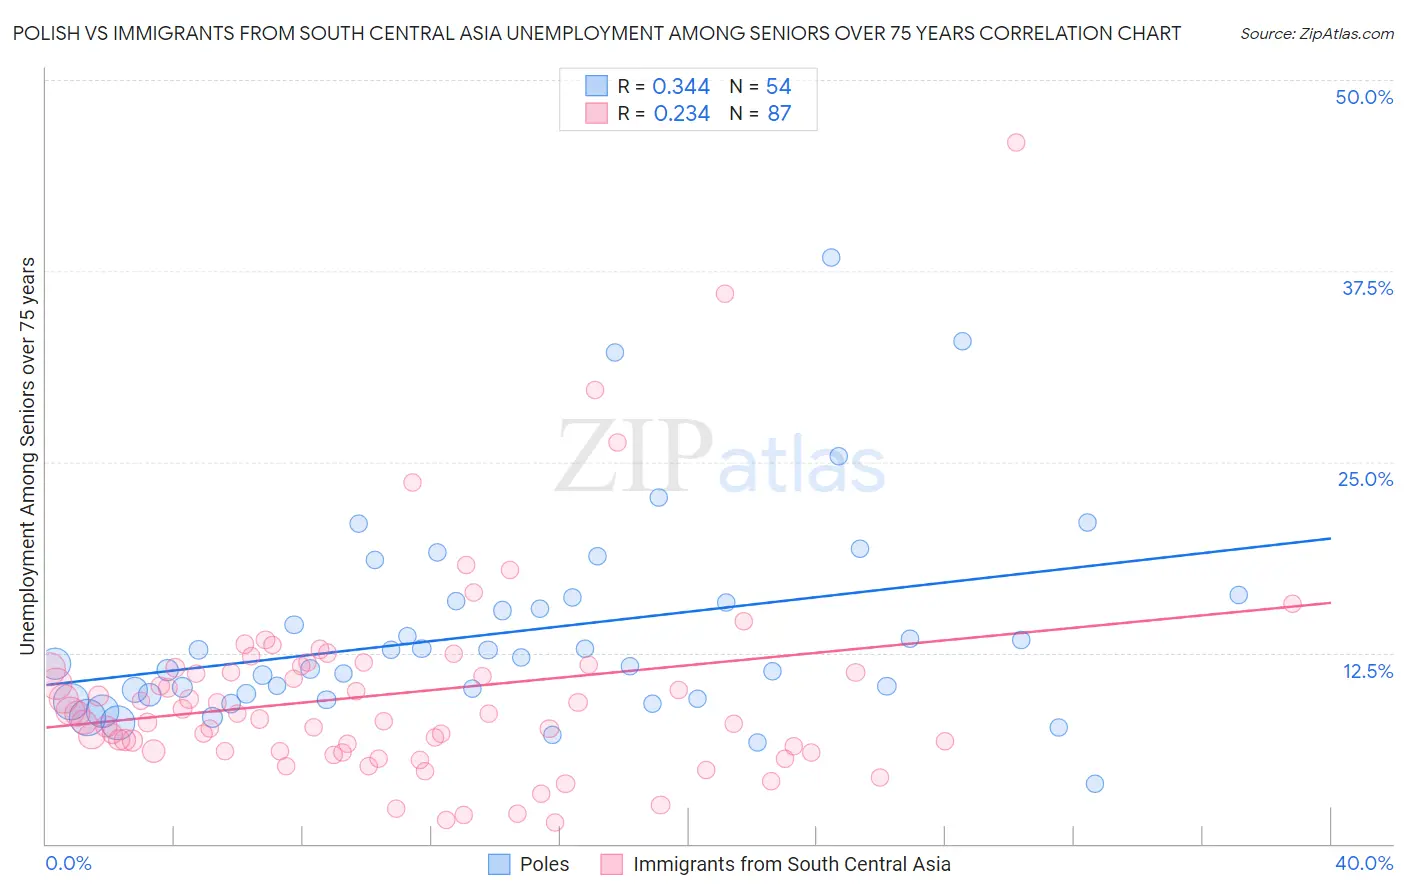 Polish vs Immigrants from South Central Asia Unemployment Among Seniors over 75 years